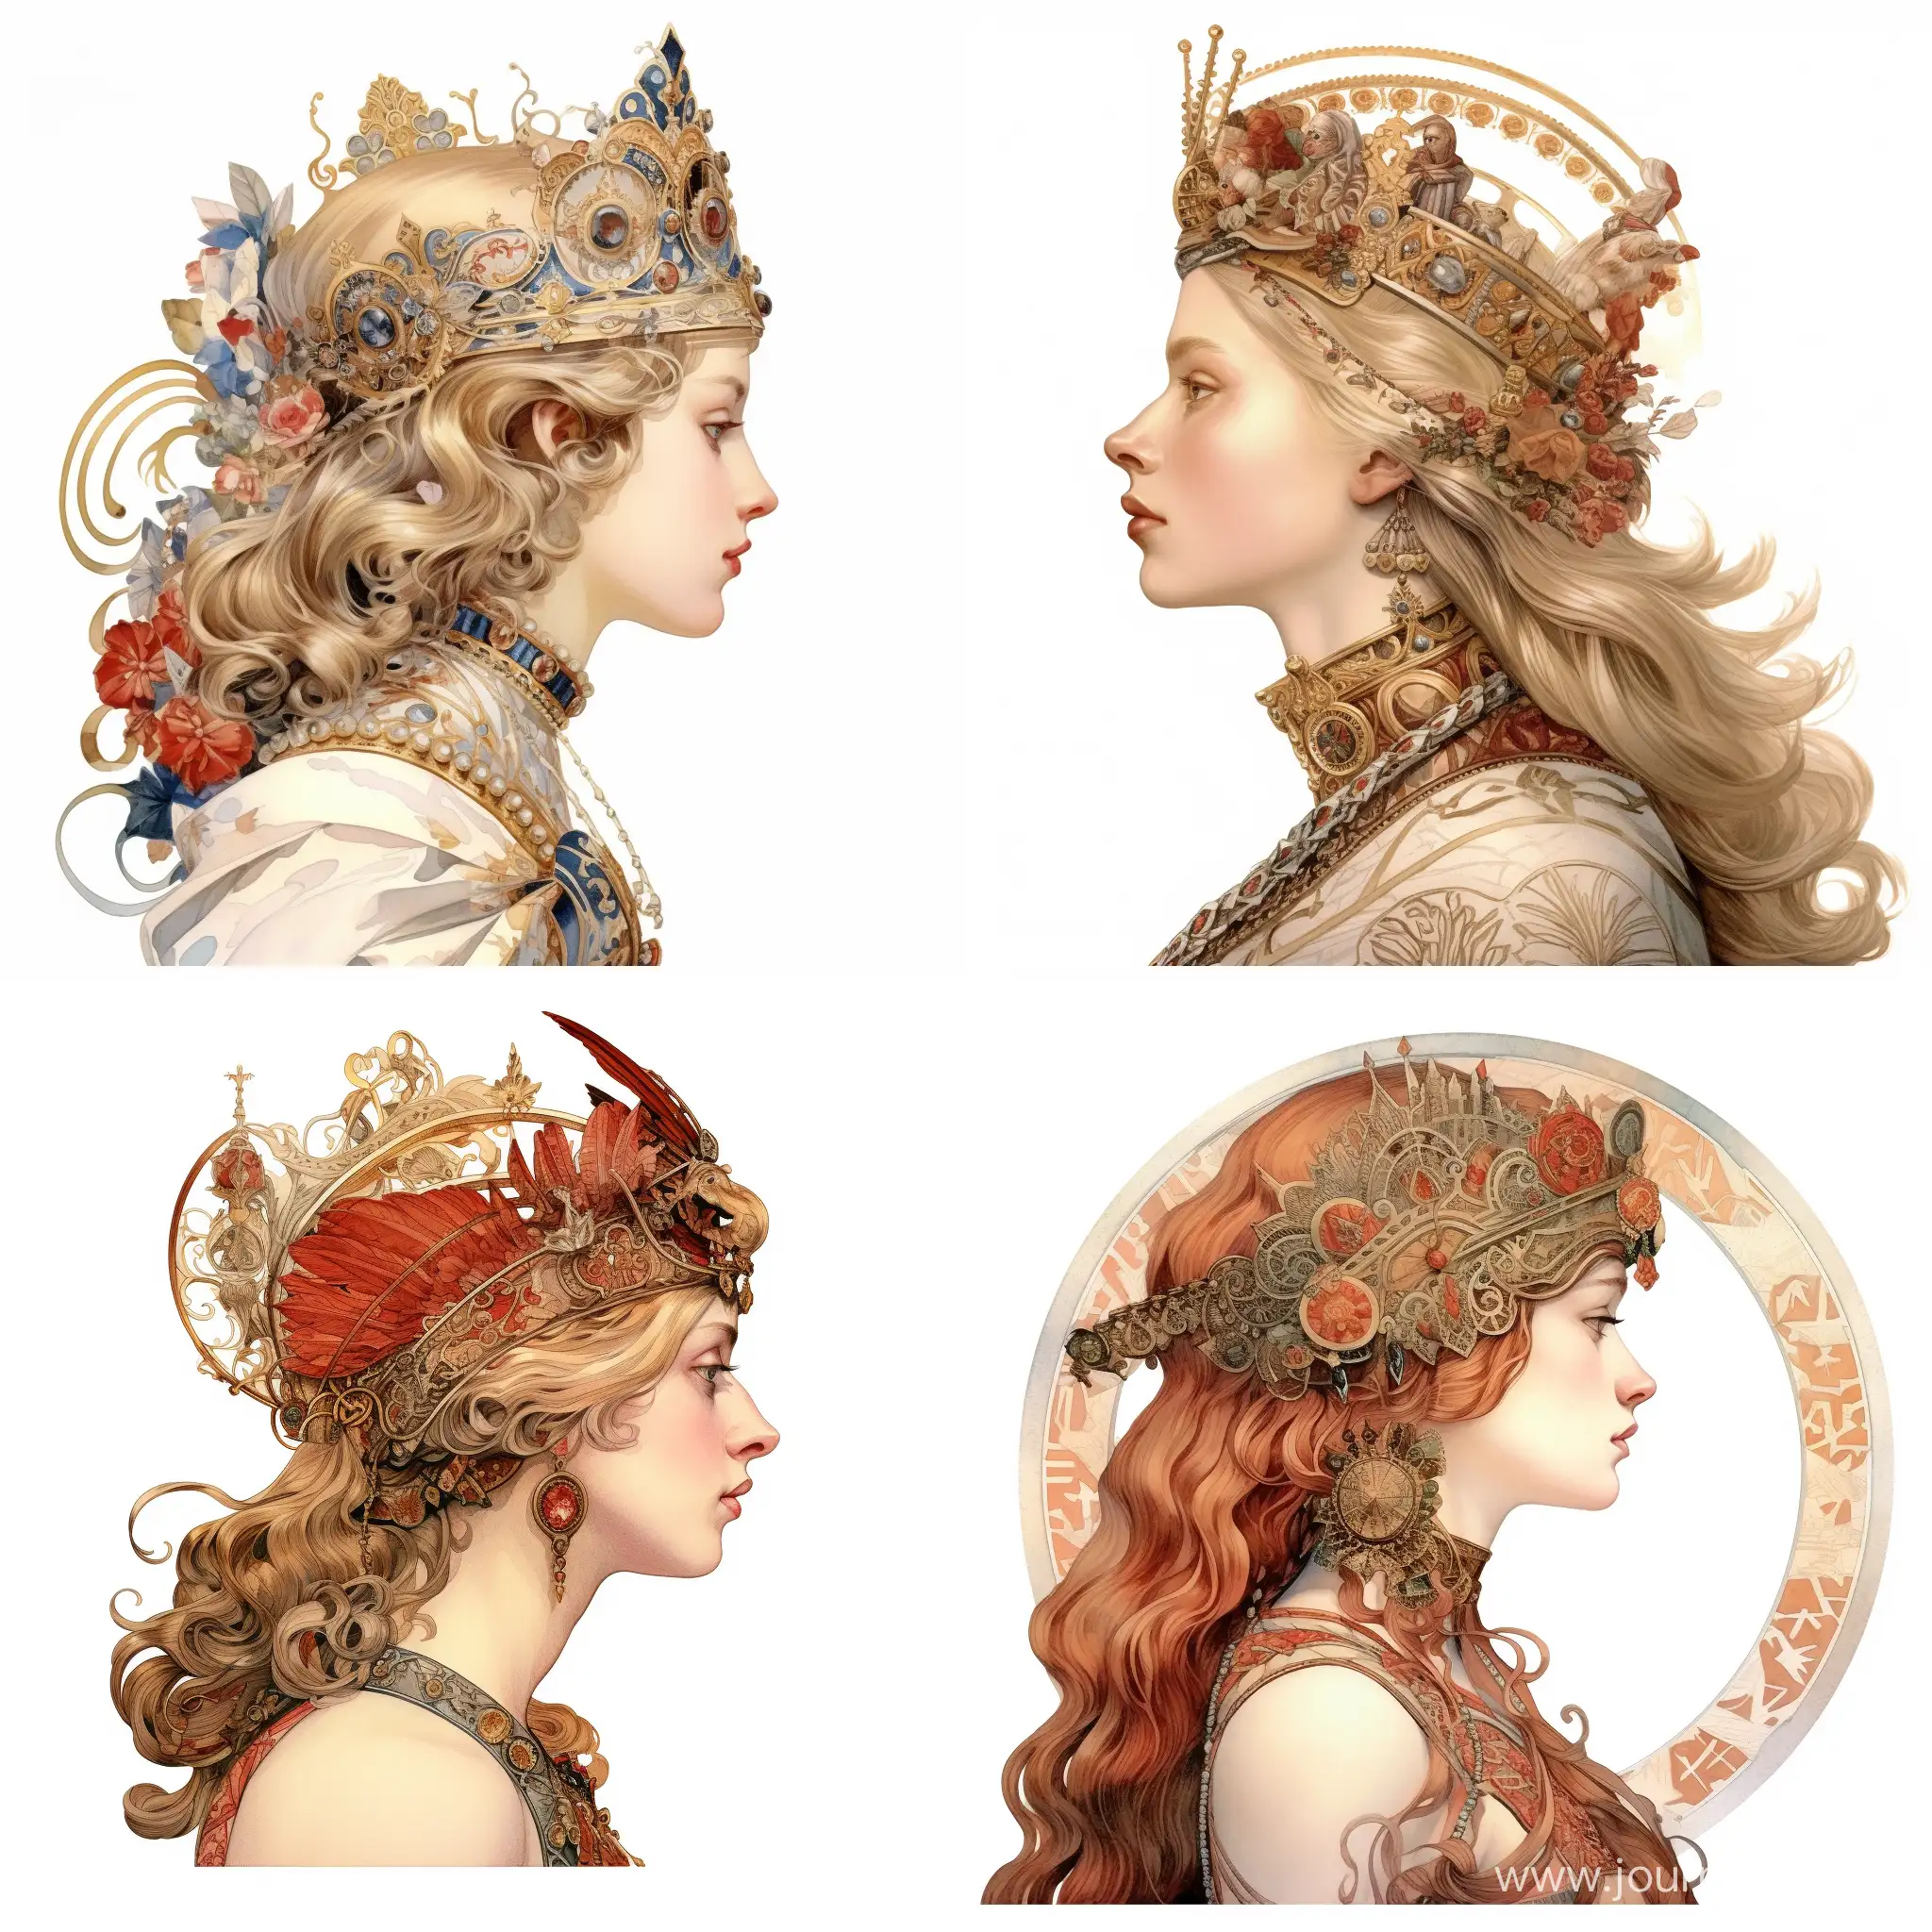 Waist portrait in profile of the queen, crown on her head, in antique royal clothes, in the style of an illustration by James Christensen, on a white background